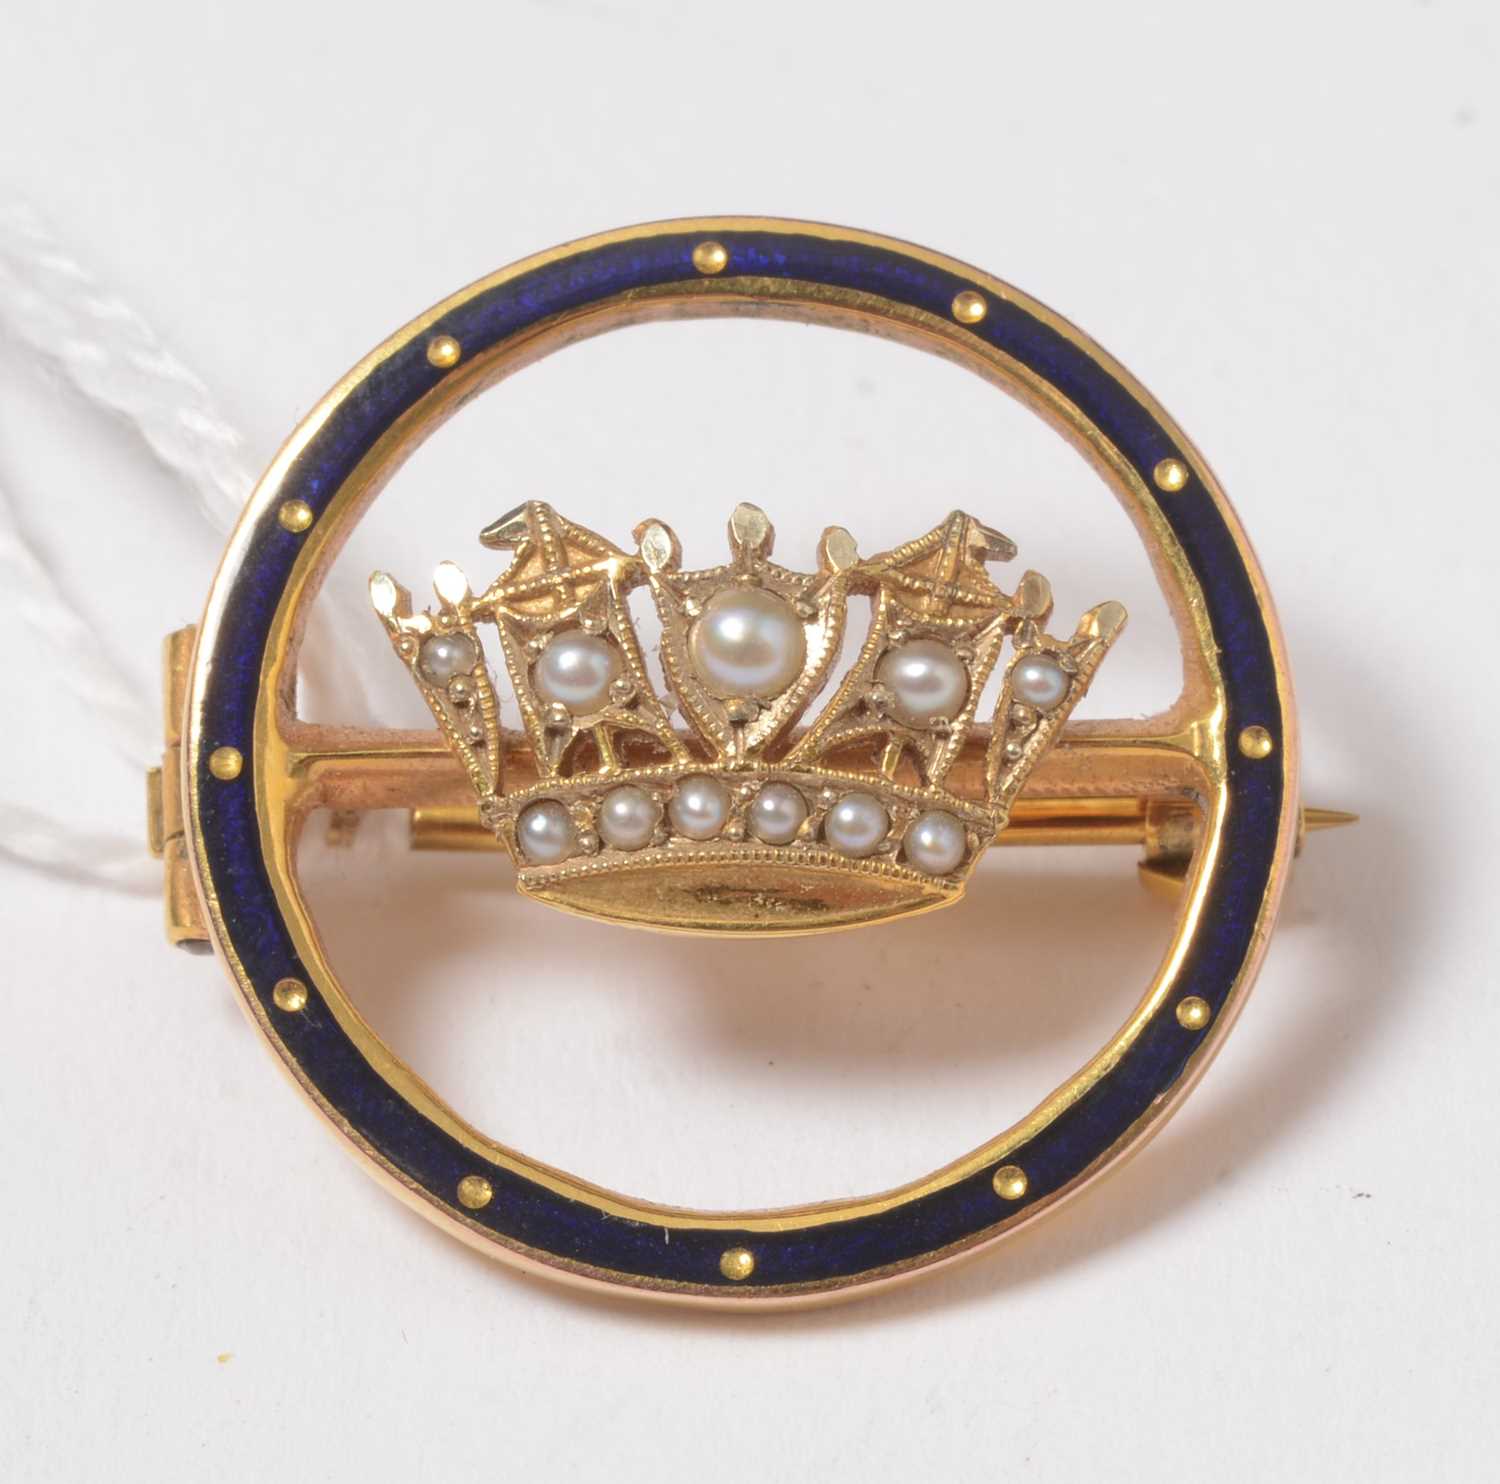 Lot 269 - A 9ct gold, split seed-pearl and enamel Royal Navy sweetheart brooch.